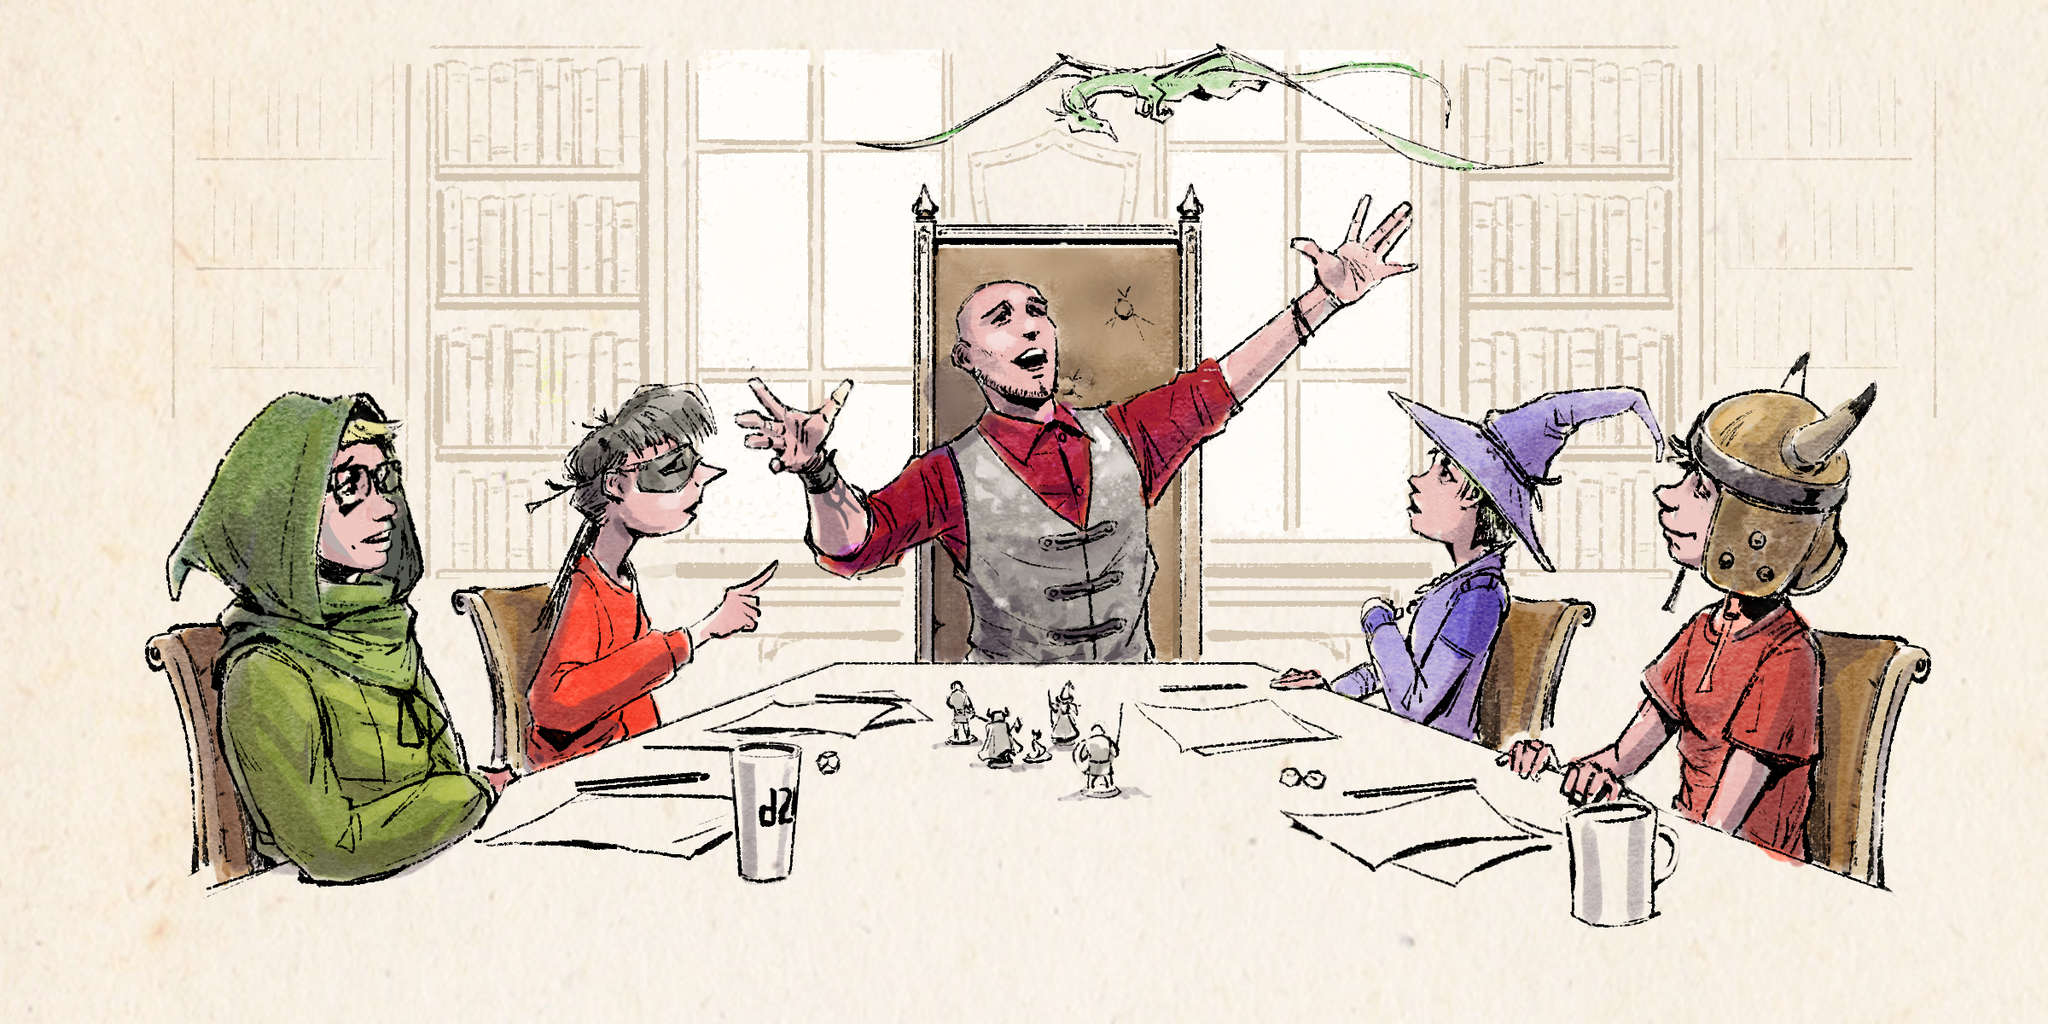 A colored sketch of four players in costume sitting around a table playing a role playing game. At the head of the table, the Game Master gesticulates. The background is made up of shelves full of books and figurines.